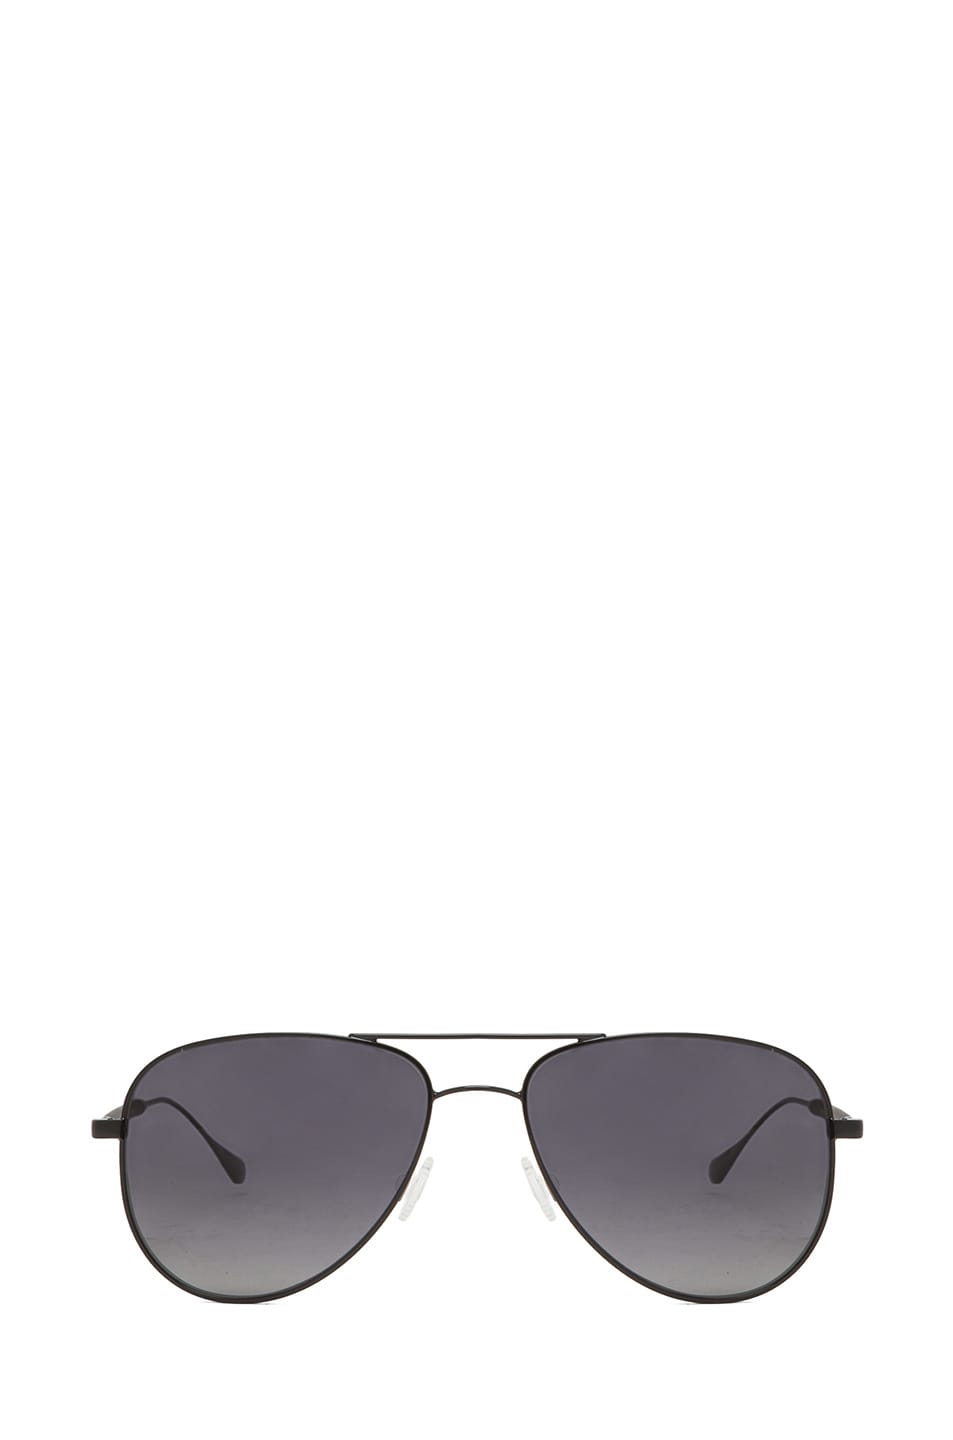 Oliver Peoples WEST Piedra Polarized Sunglasses in Matte Black ...